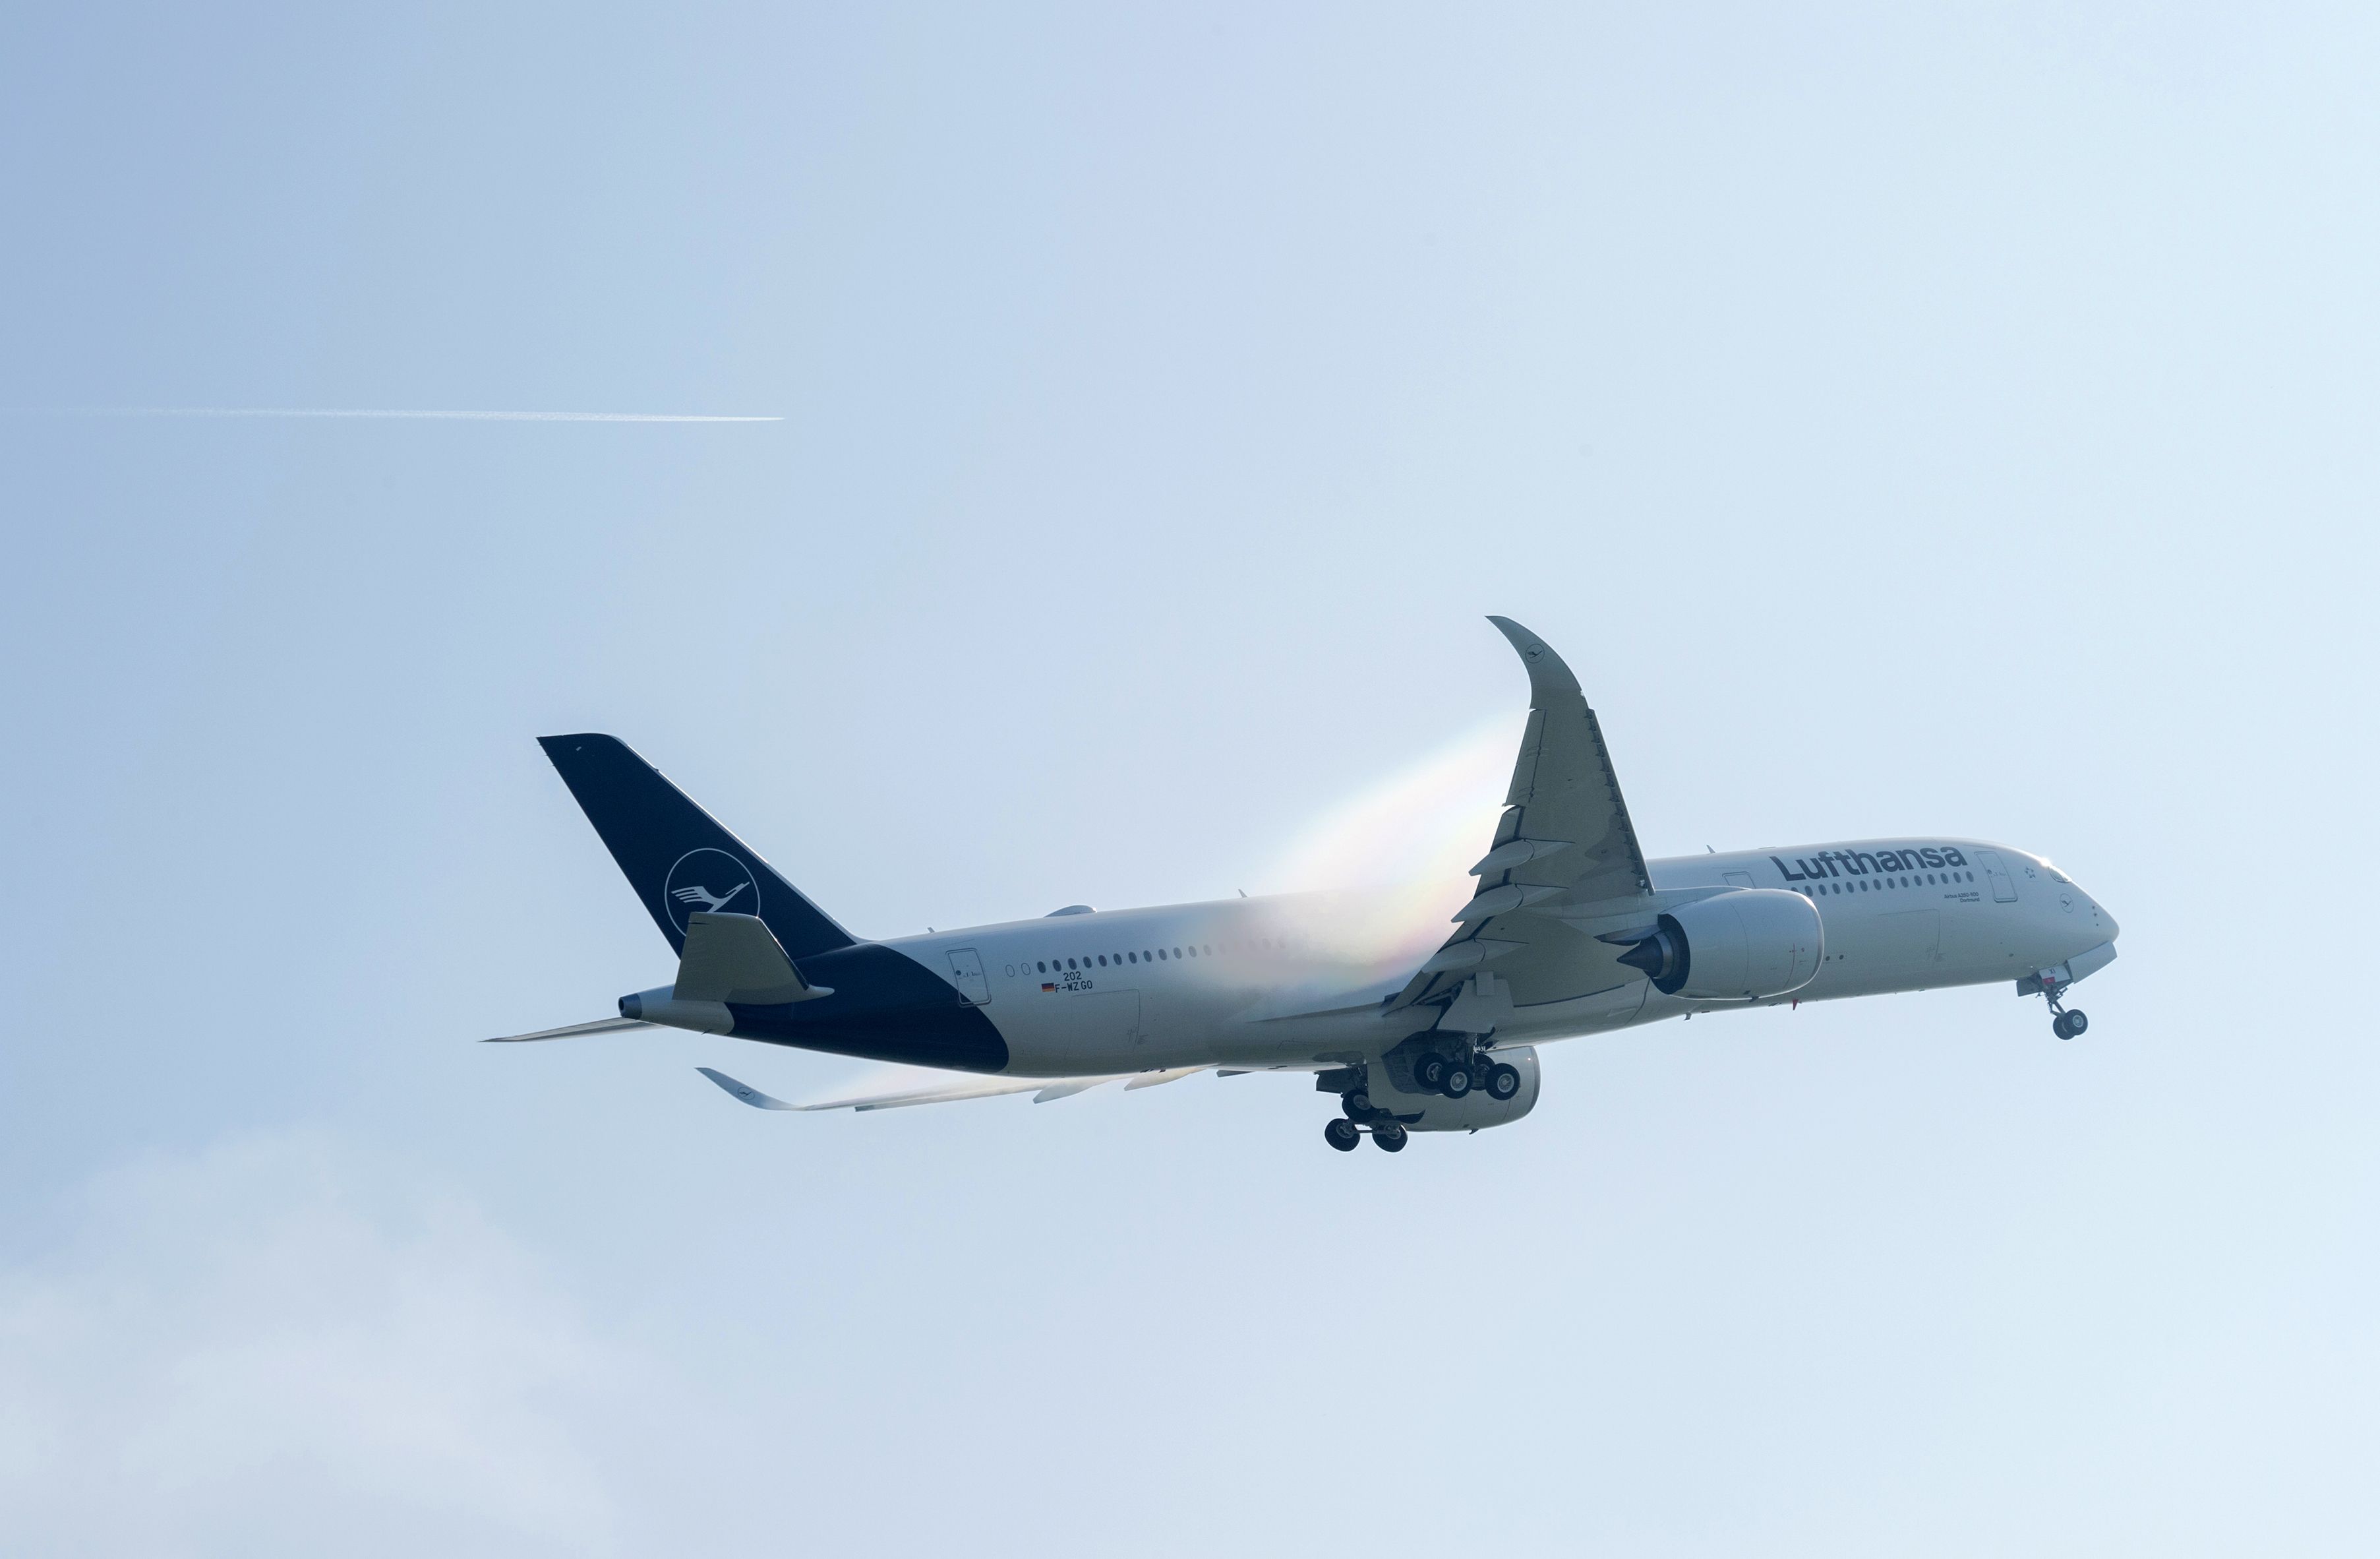 Lufthansa Airbus A350 Remains Stuck In Angola 4 Days After Diversion